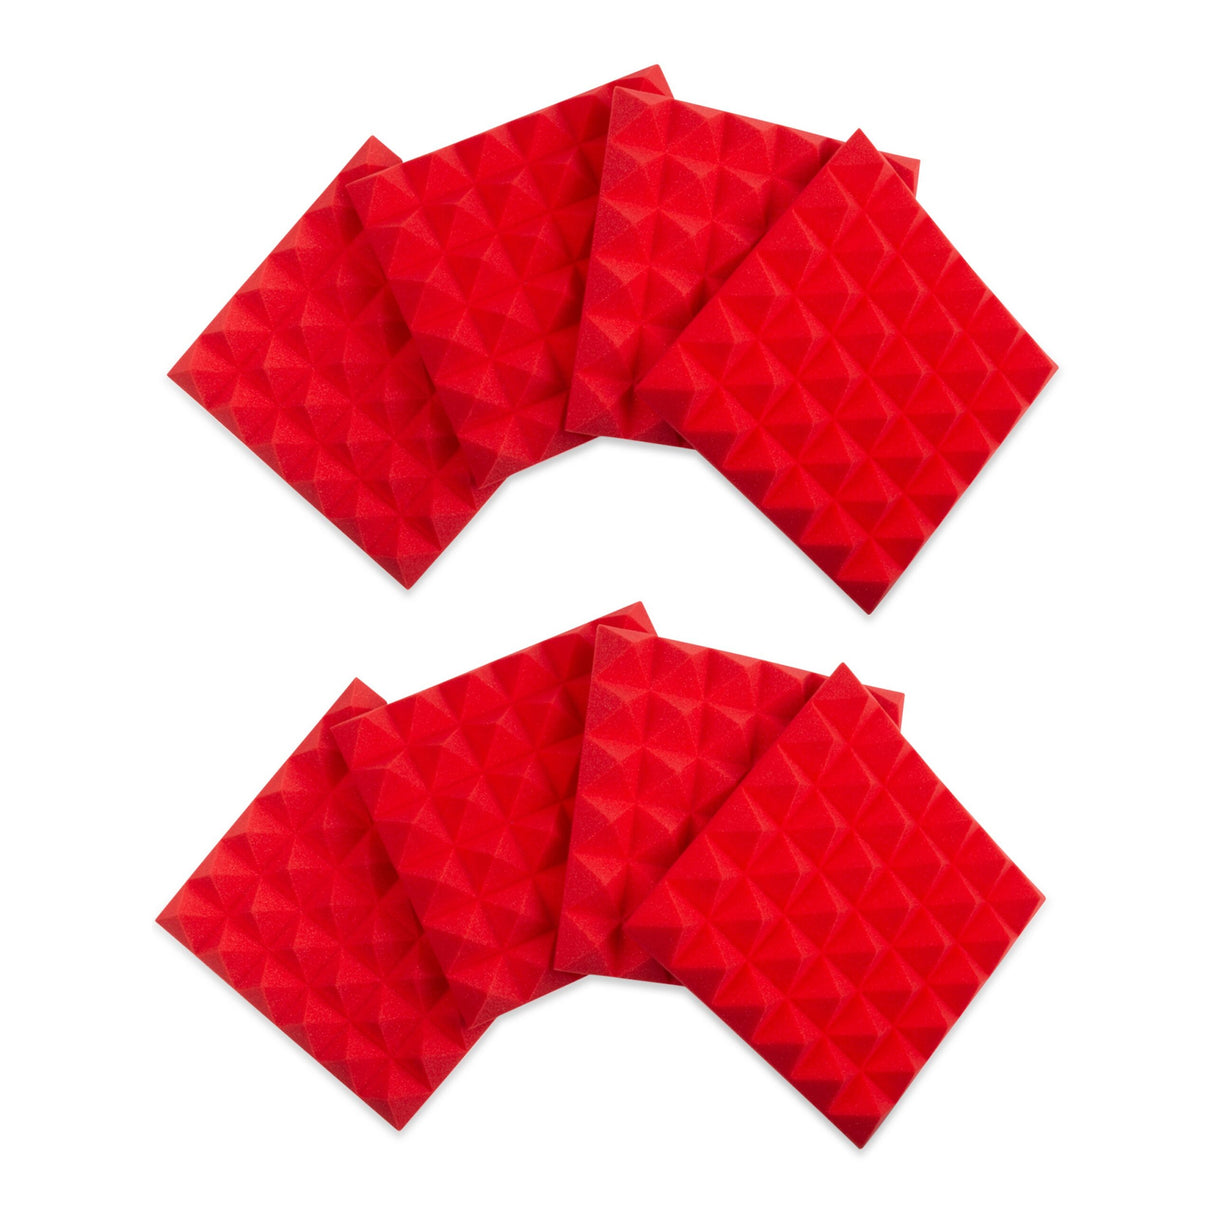 Gator GFW-ACPNL1212PRED-8PK 8 Pack of Red Acoustic Pyramid Panel, 12 x 12 Inches